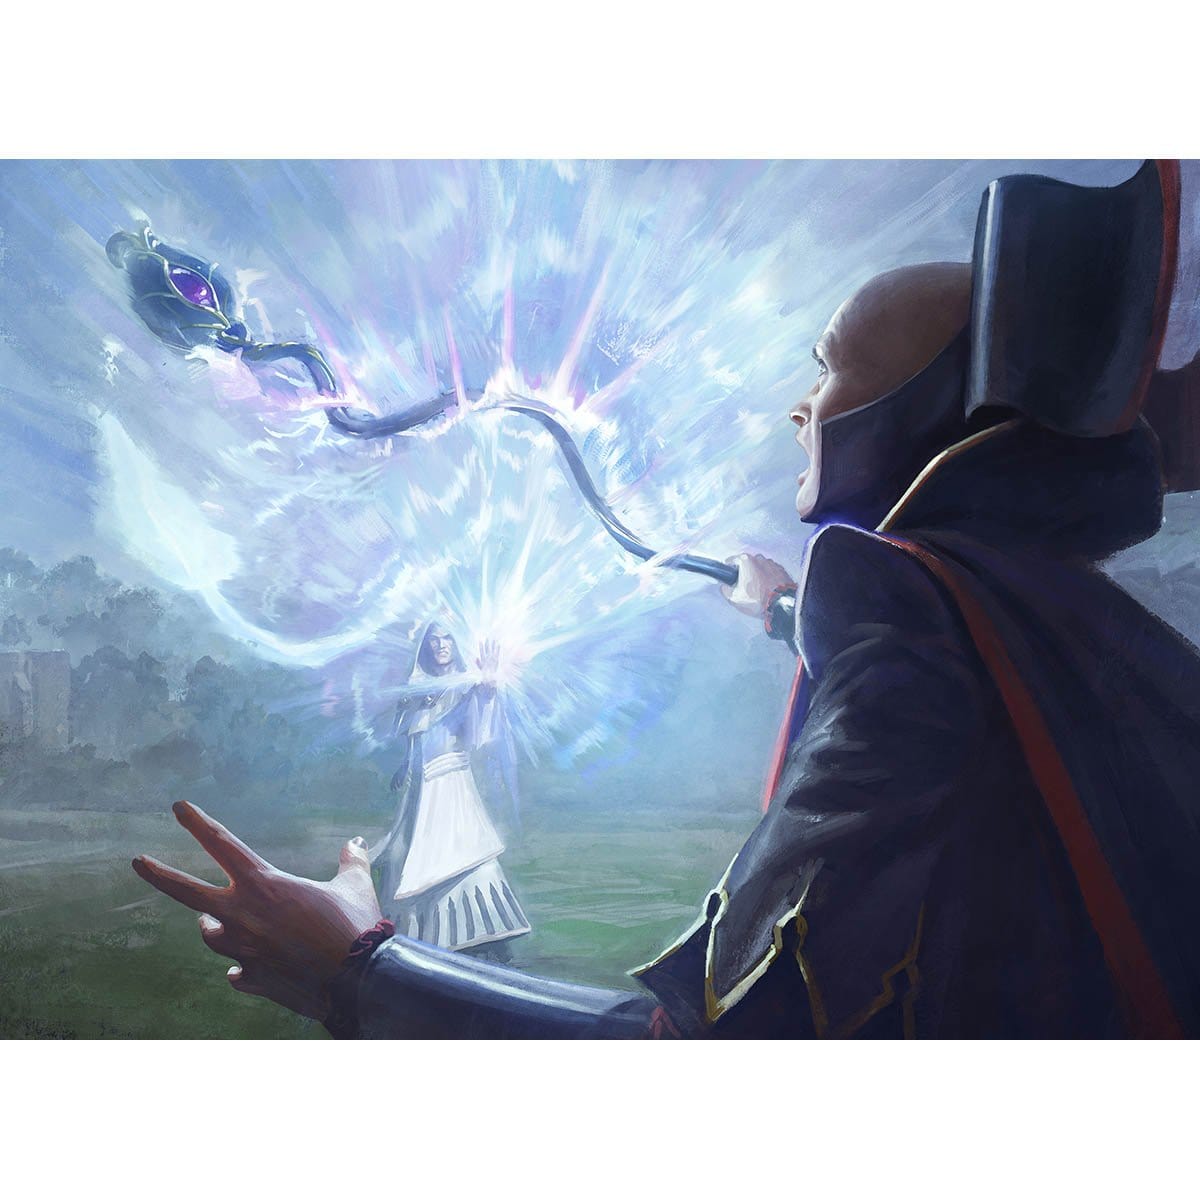 Ray of Distortion Print - Print - Original Magic Art - Accessories for Magic the Gathering and other card games